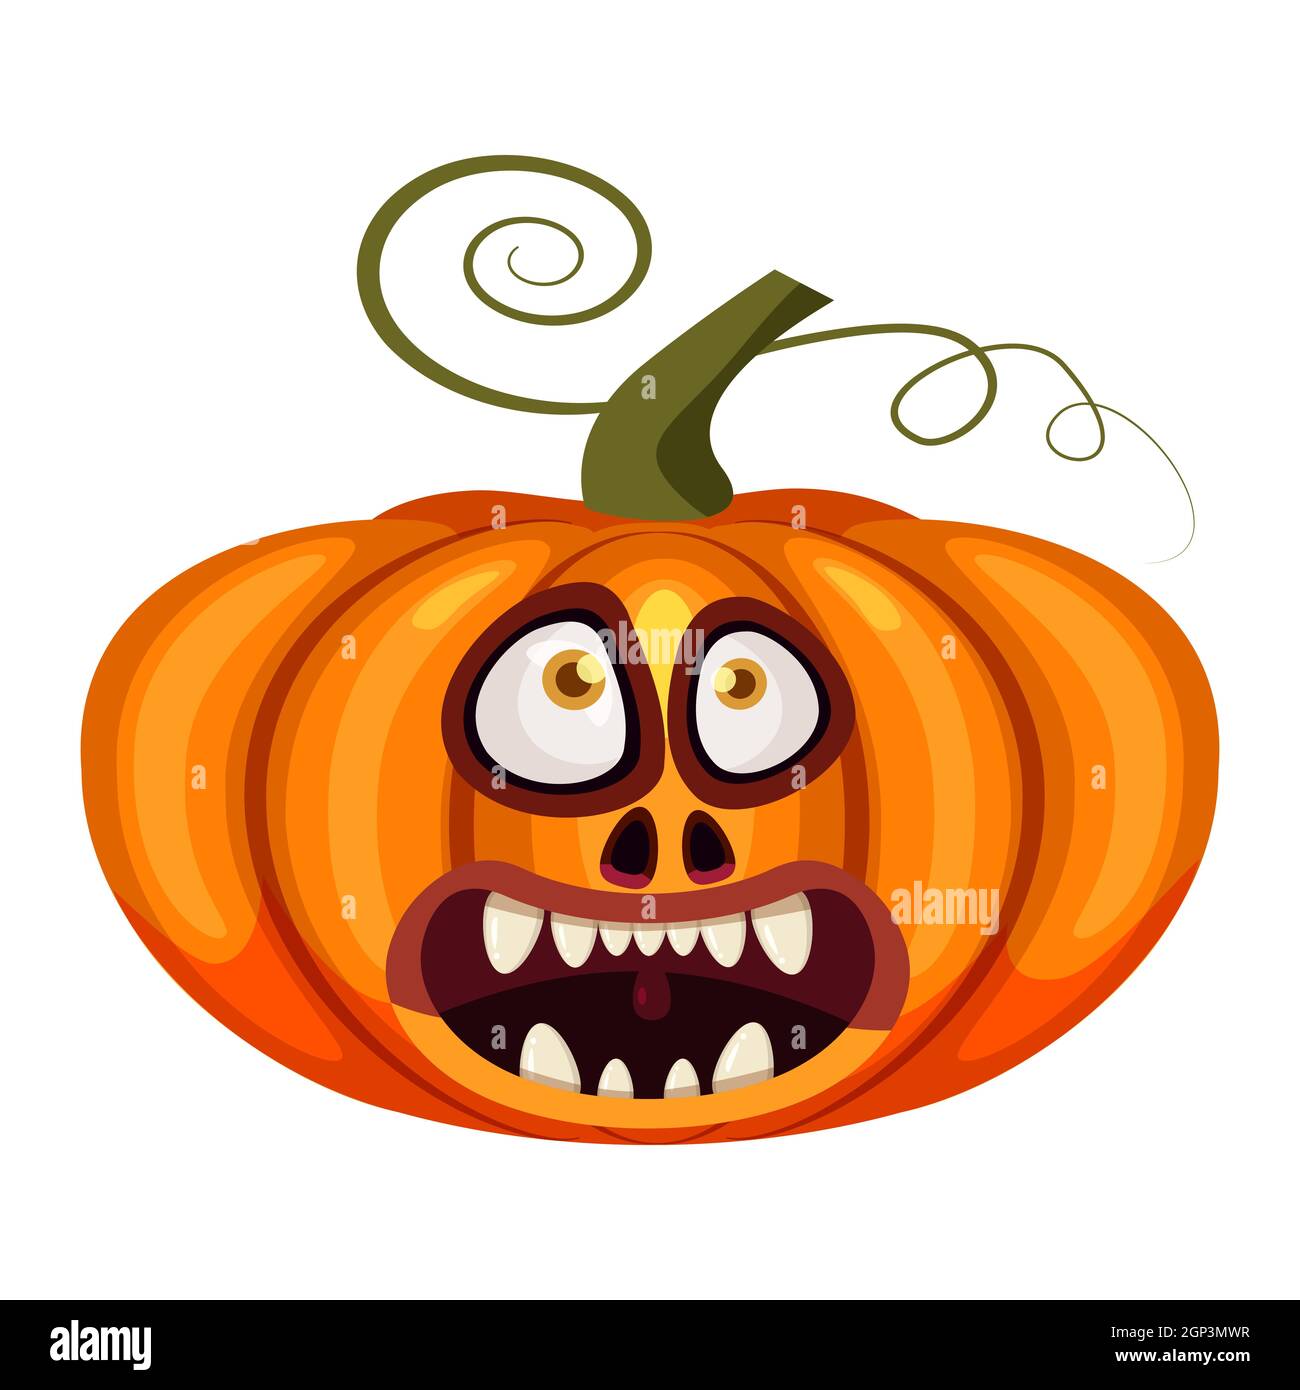 Cartoon Isolated Scary Vampire Character Vector Illustration For Halloween  Stock Illustration - Download Image Now - iStock